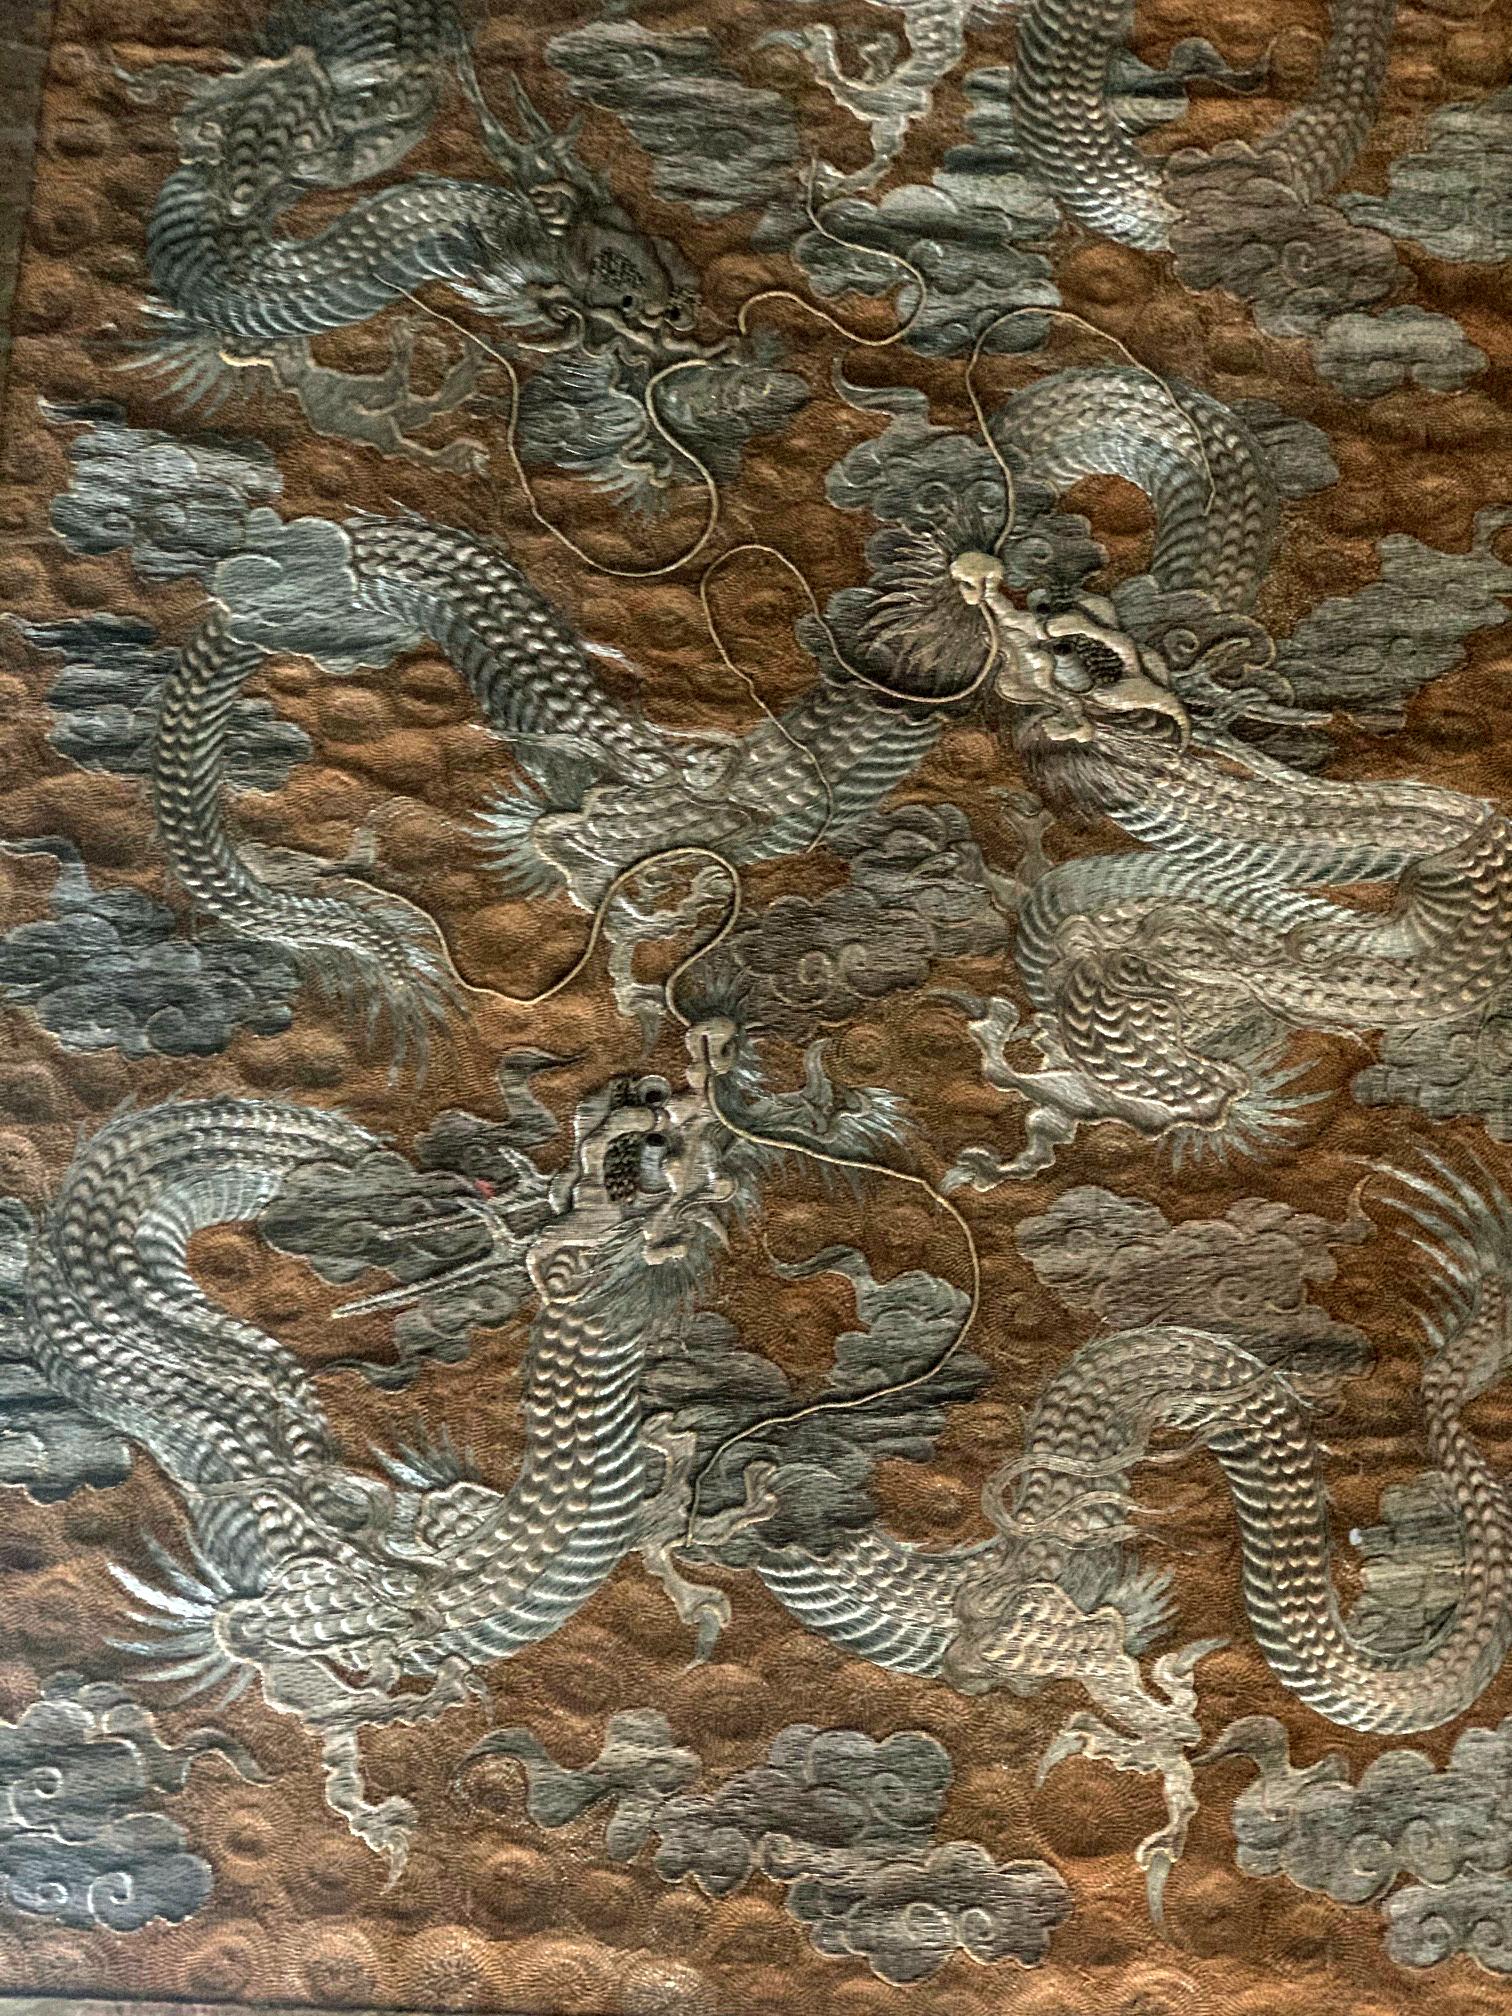 An impressive Japanese embroidery tapestry circa 1890s Meiji period, presented with brocade border on linen canvas in a Lucite shadow box. The stunning design features three dragons coiling and flying in the clouds. The high relief technique used to